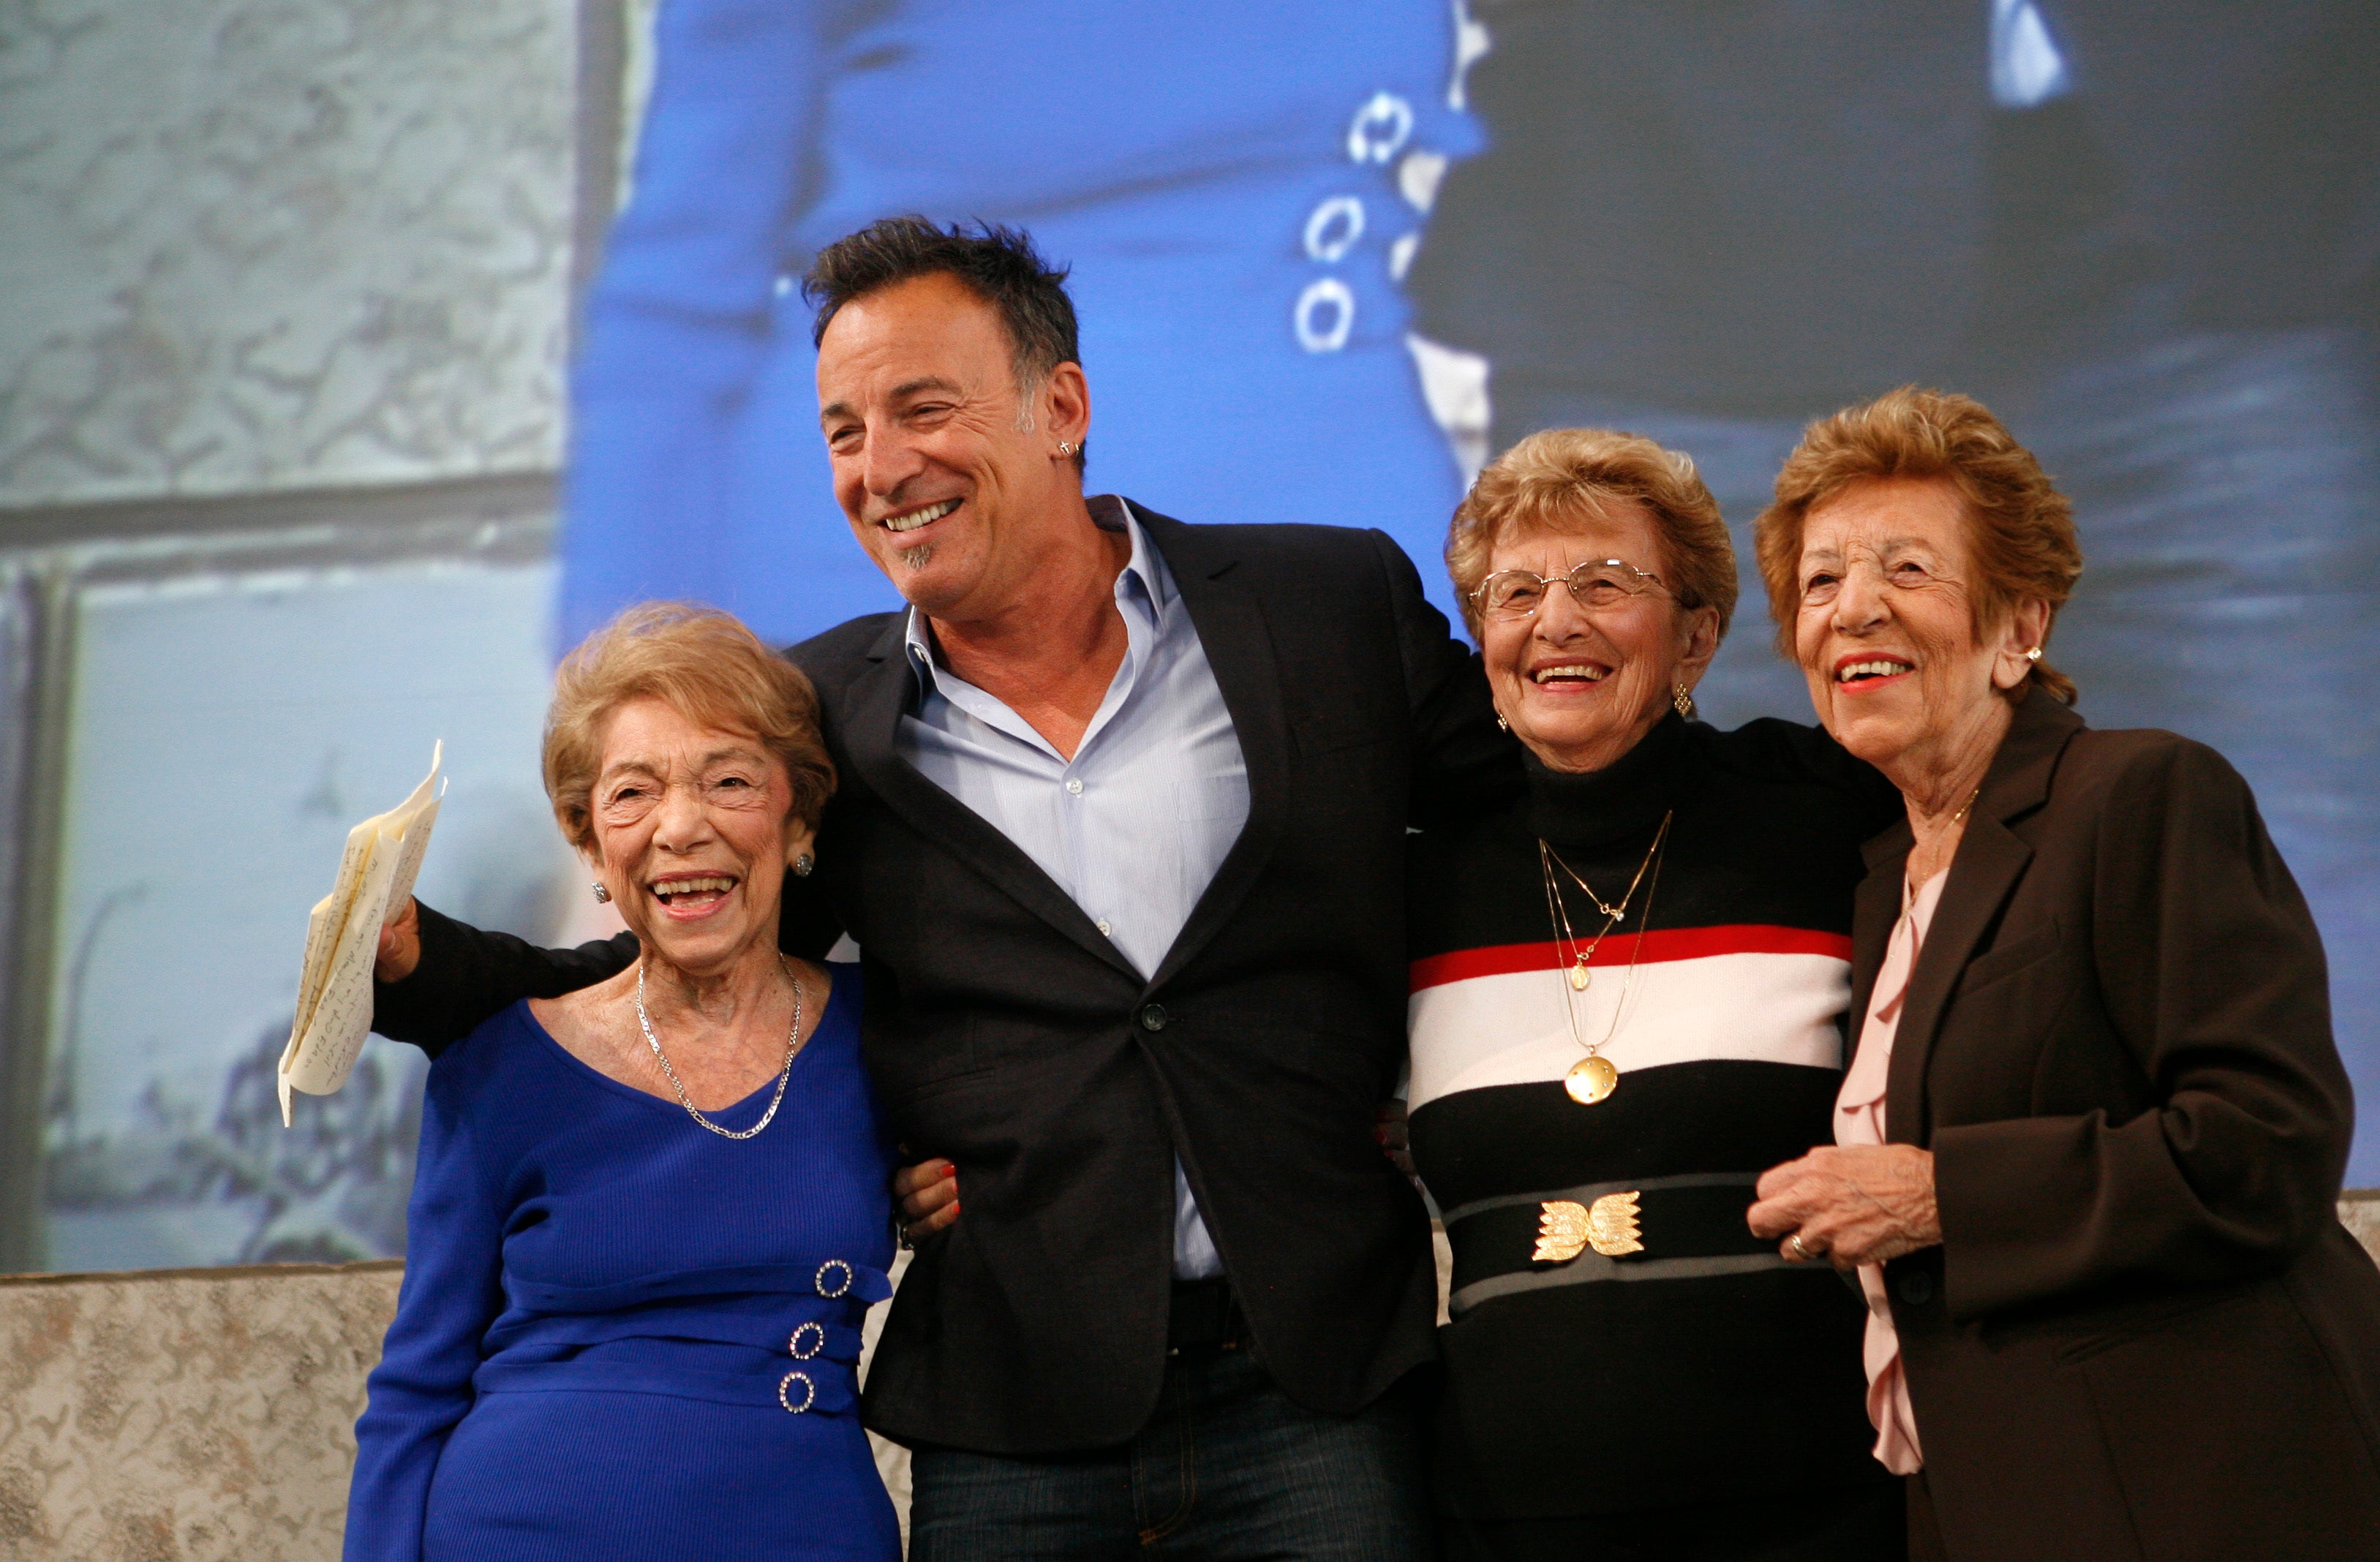 Bruce with his mum Adele (left) and aunts during his Ellis Island speech in 2010